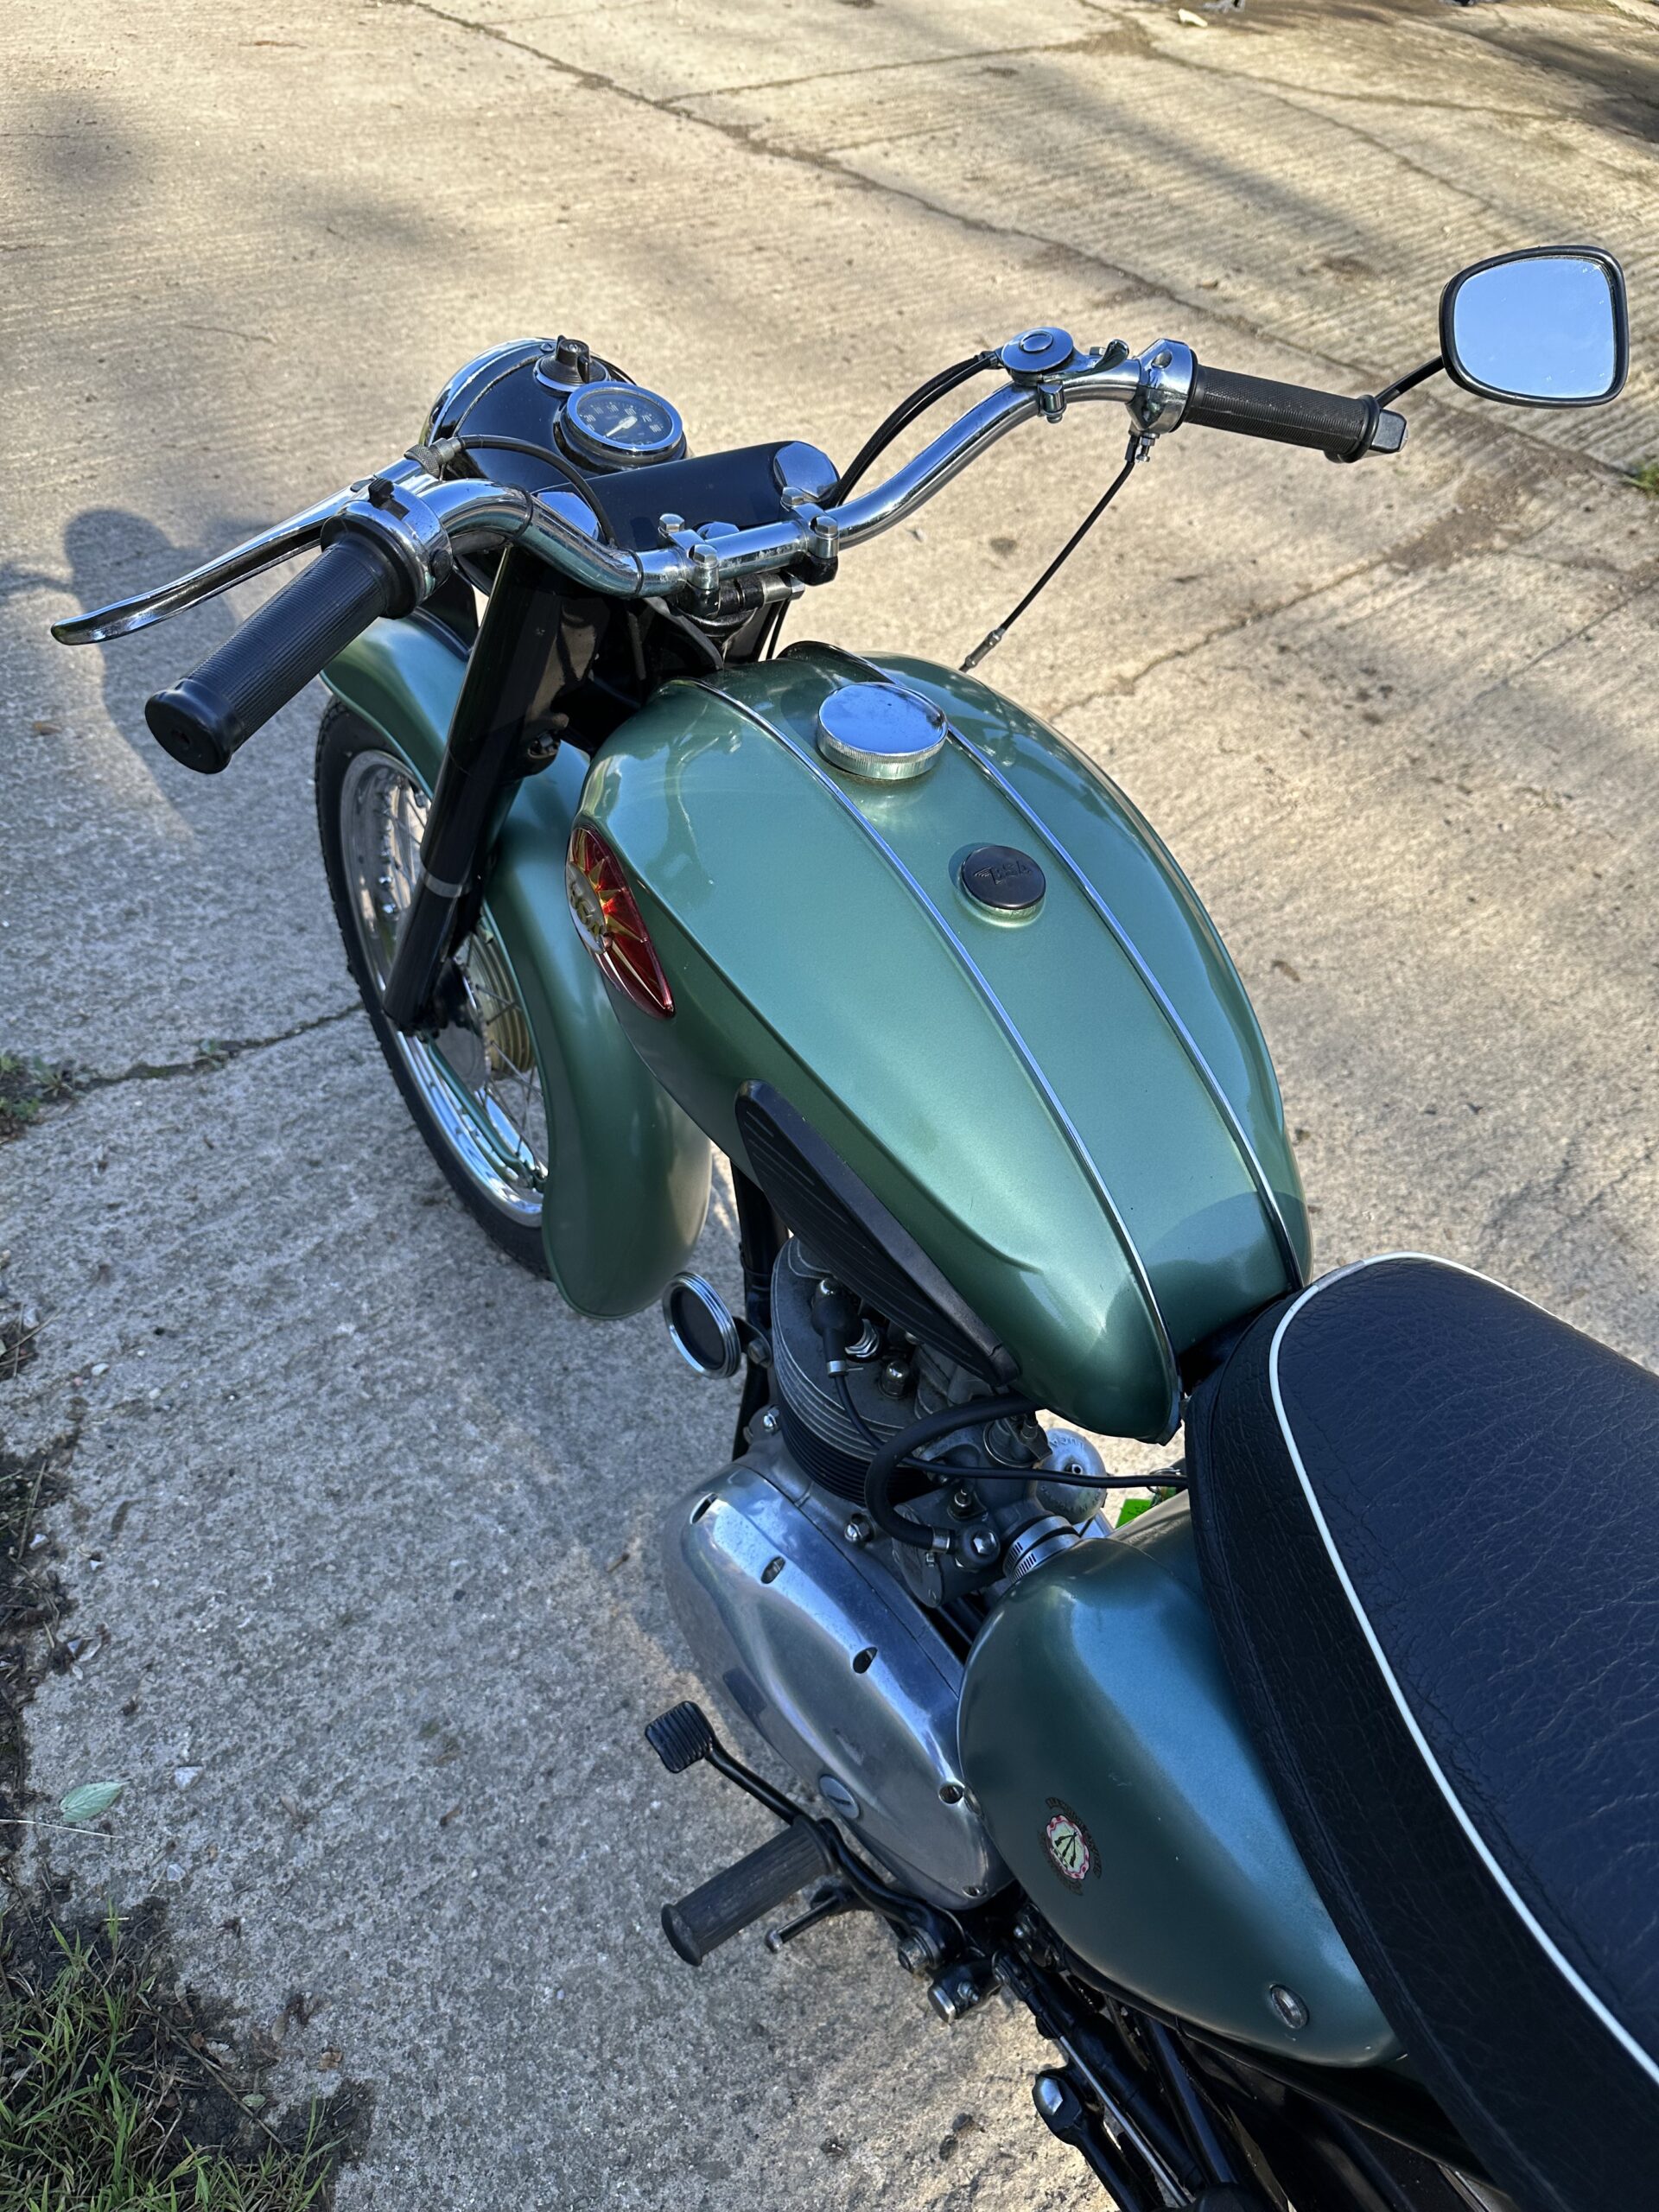 1961 B.S.A. C15 in Almond Green - GB Motorcycles